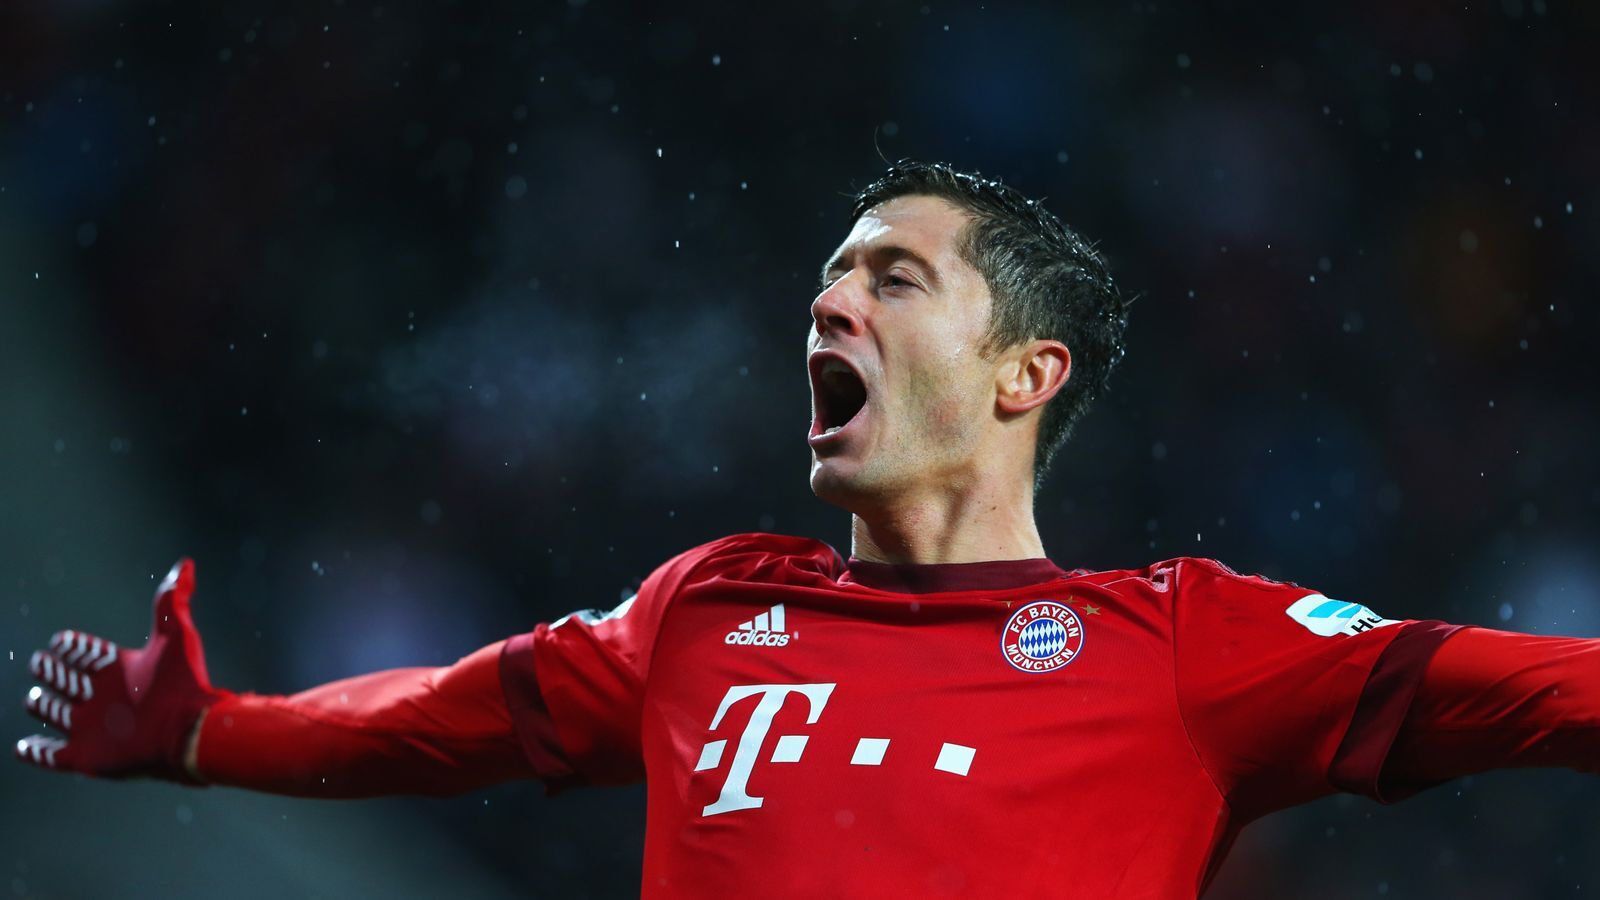 Robert Lewandowski Only Wants to Score More Goals and Win More Trophies